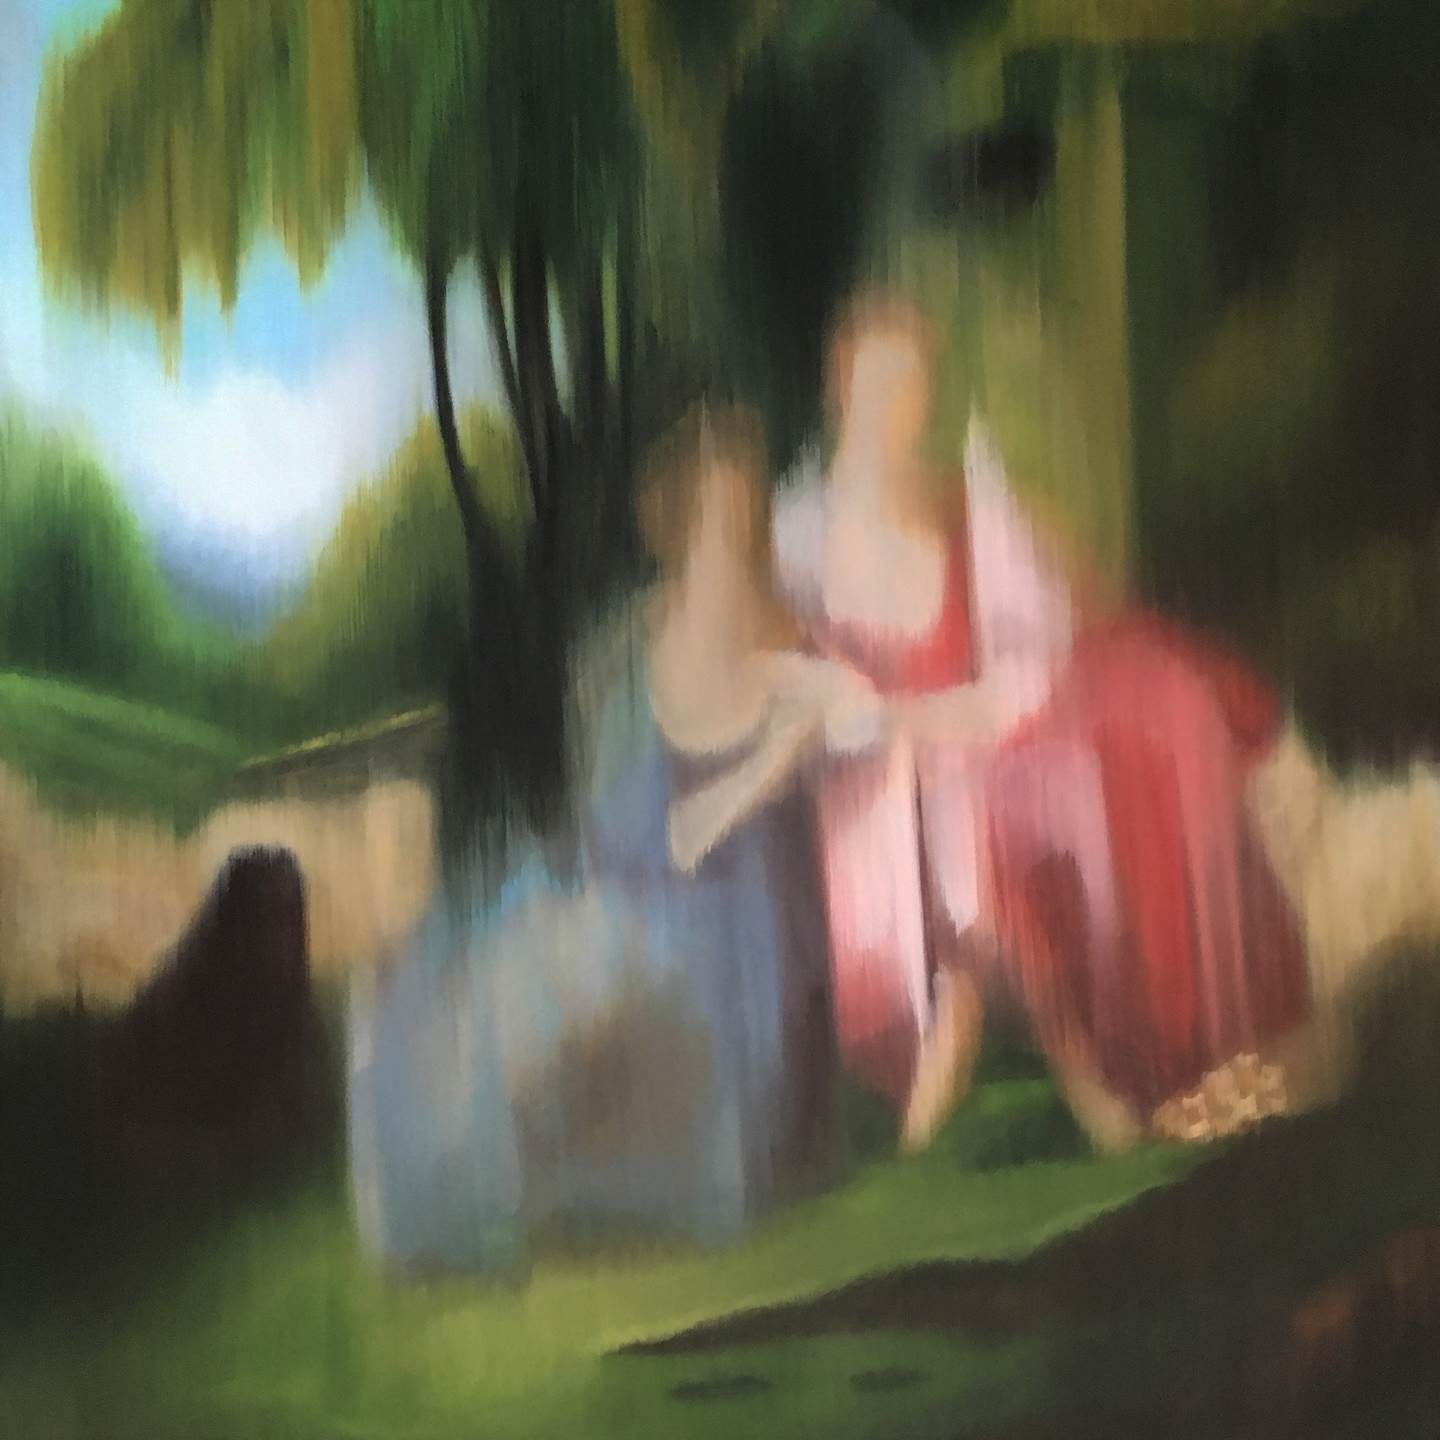 A Pequena Sinfonia, original   Painting by Paulo Ponte